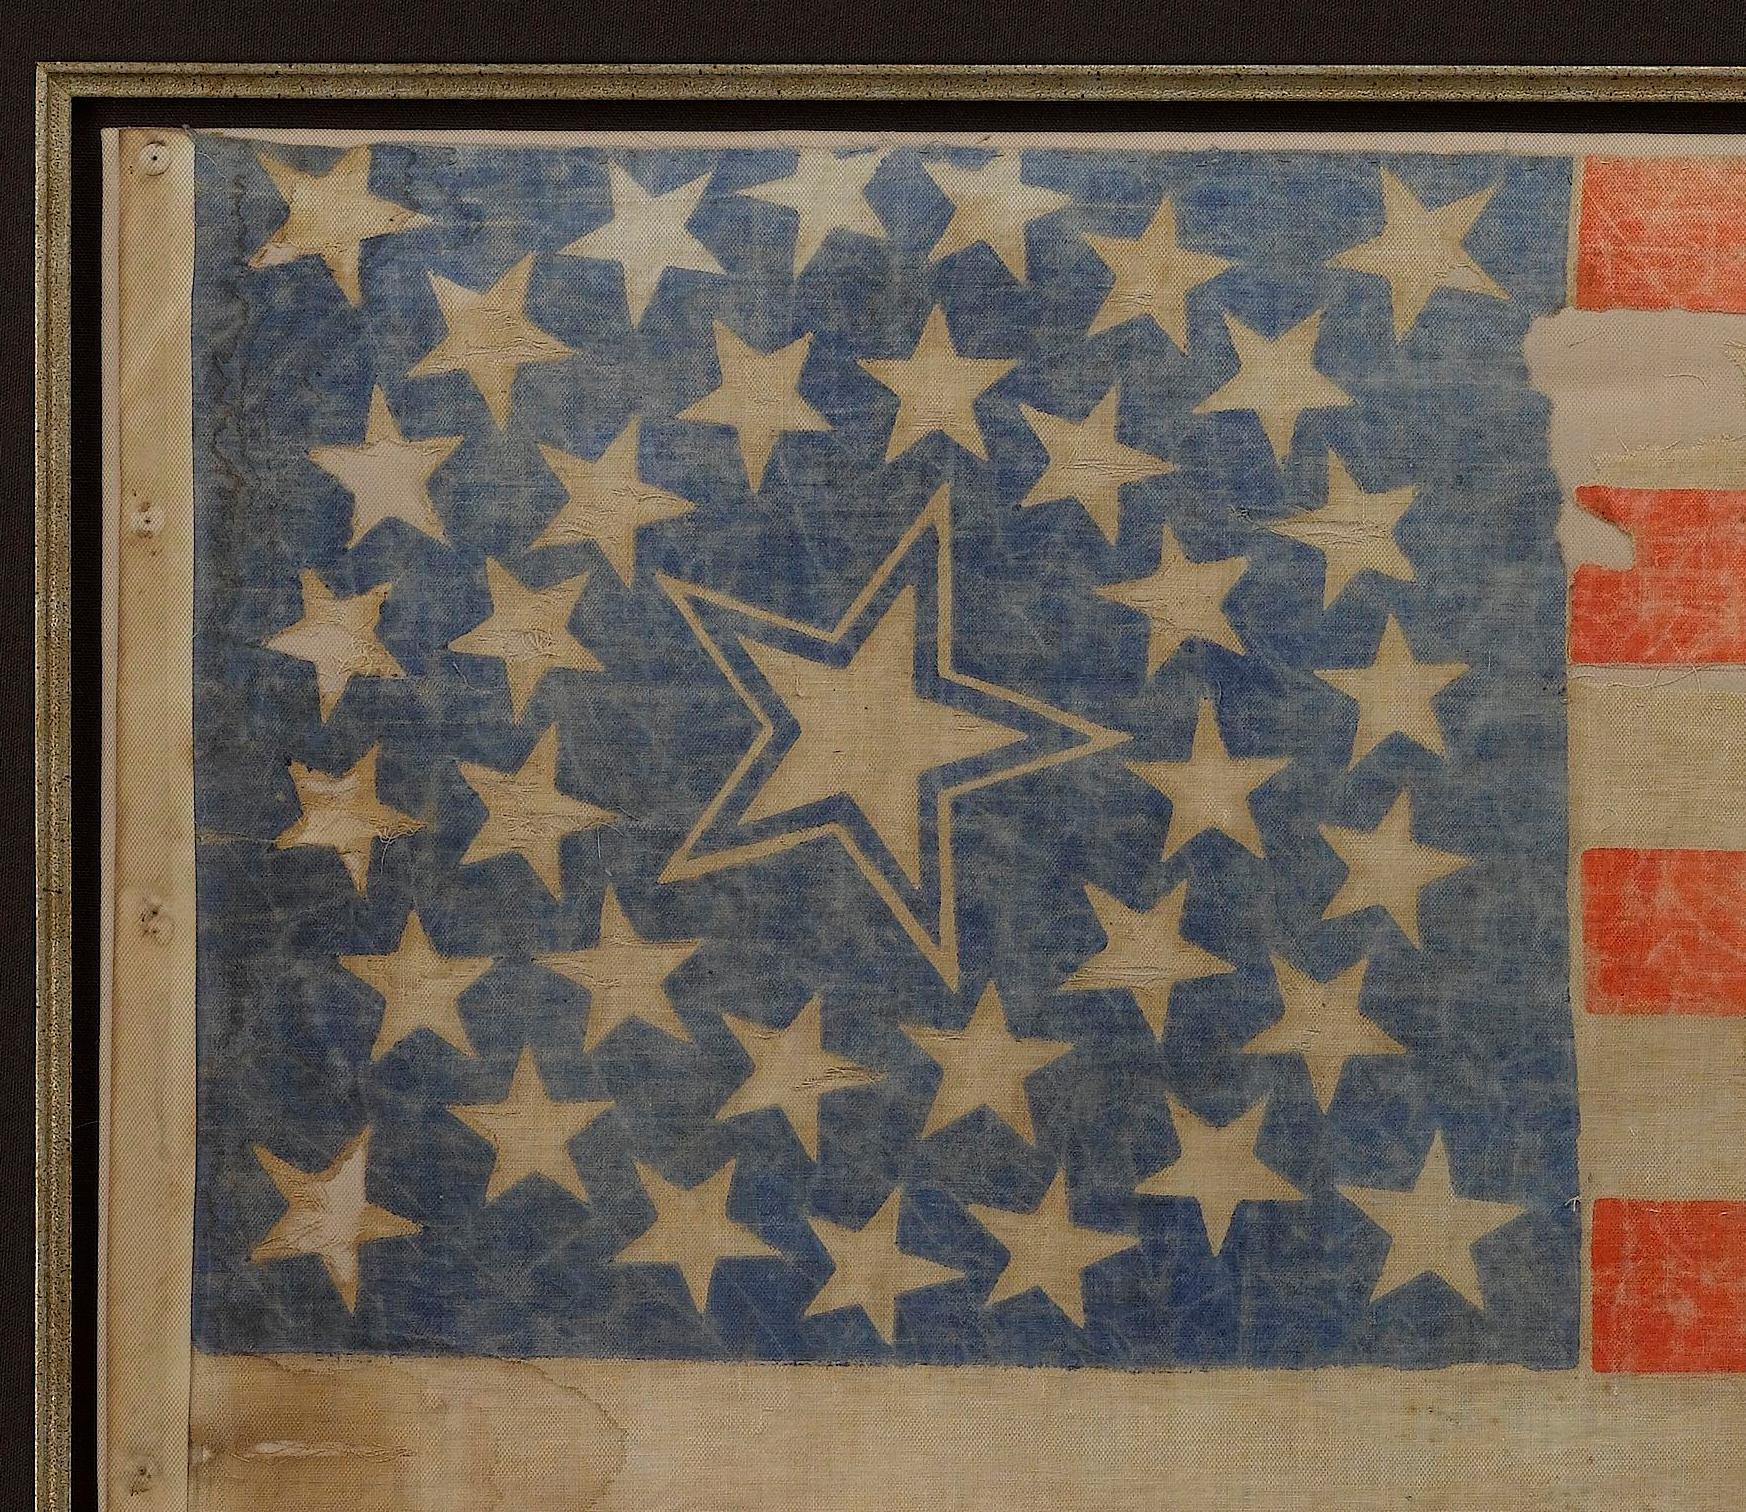 36-Star Printed American Flag, Rare Haloed Star Medallion, Circa 1865 In Good Condition For Sale In Colorado Springs, CO